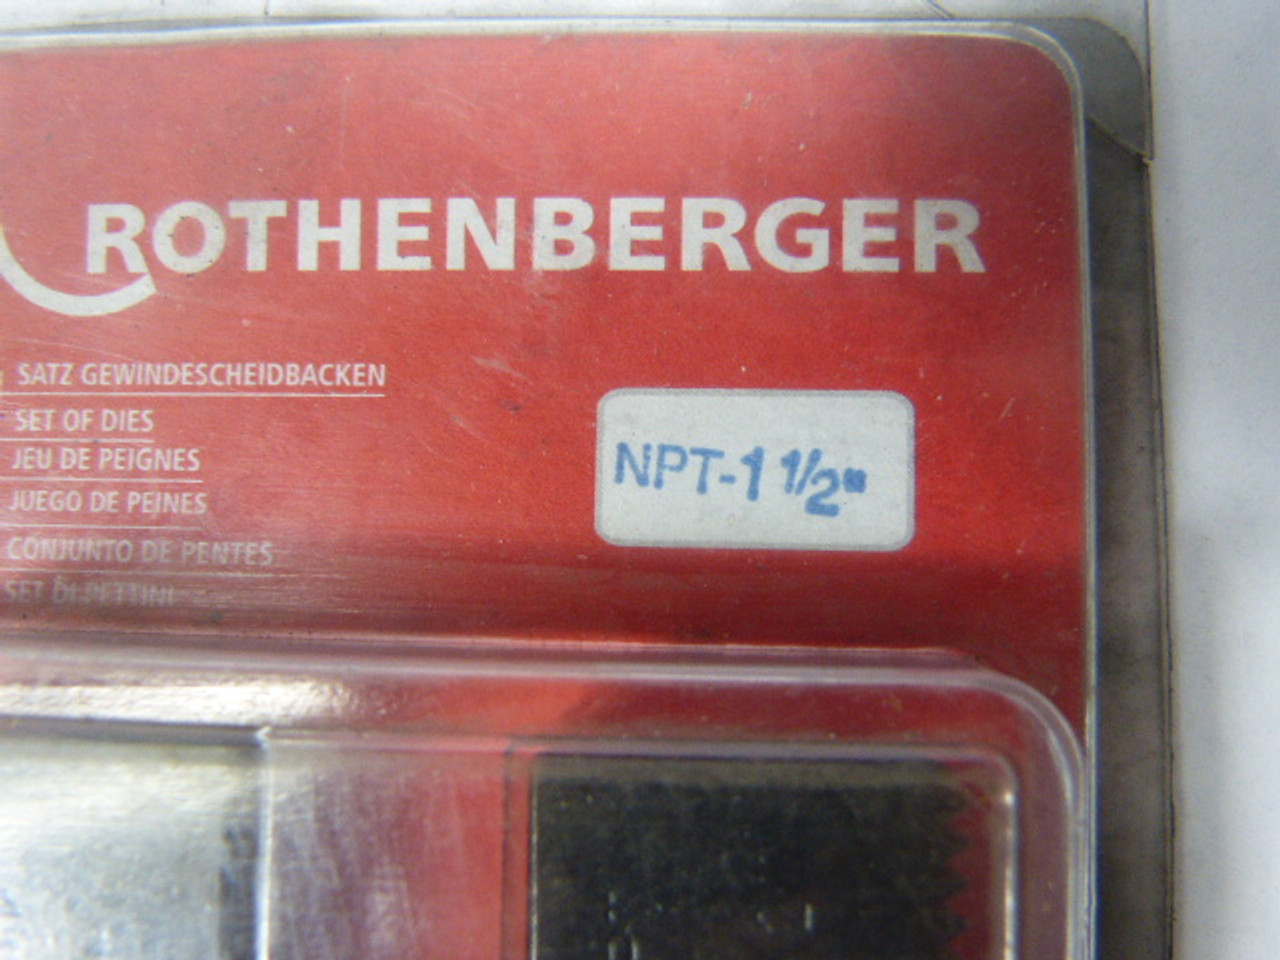 Rothenberger  070917X 1-1/2Inch NPT Cutting Jaws Set of 4 DAMAGE PACKAGE NEW